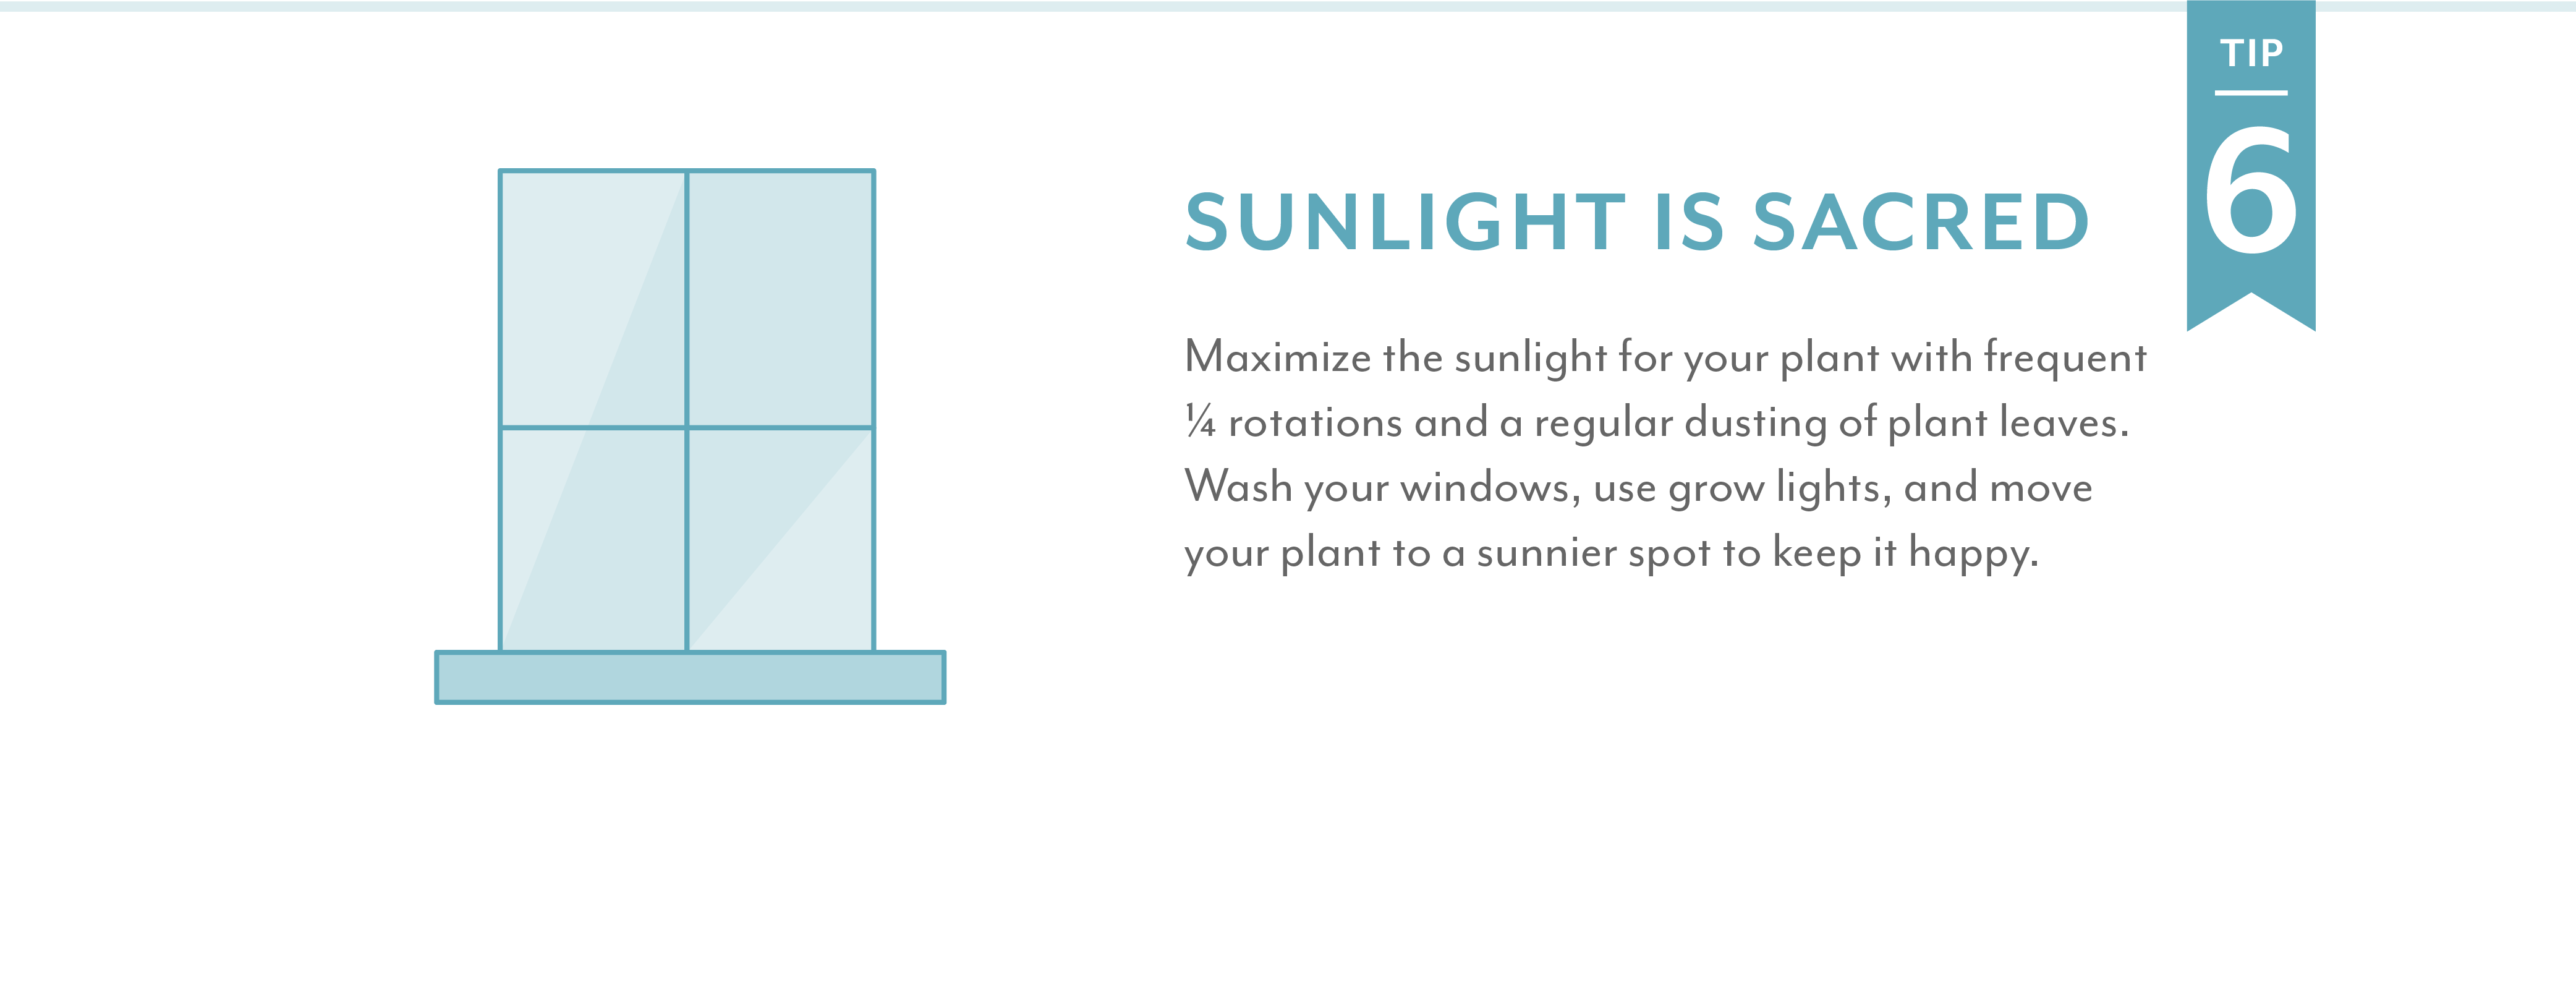 Salisbury Greenhouse | Sunlight is sacred Maximize the sunlight for your plant with frequent Â¼ rotations and a regular dusting of plant leaves. Wash your windows, use grow lights, and move your plant to a sunnier spot to keep it happy.